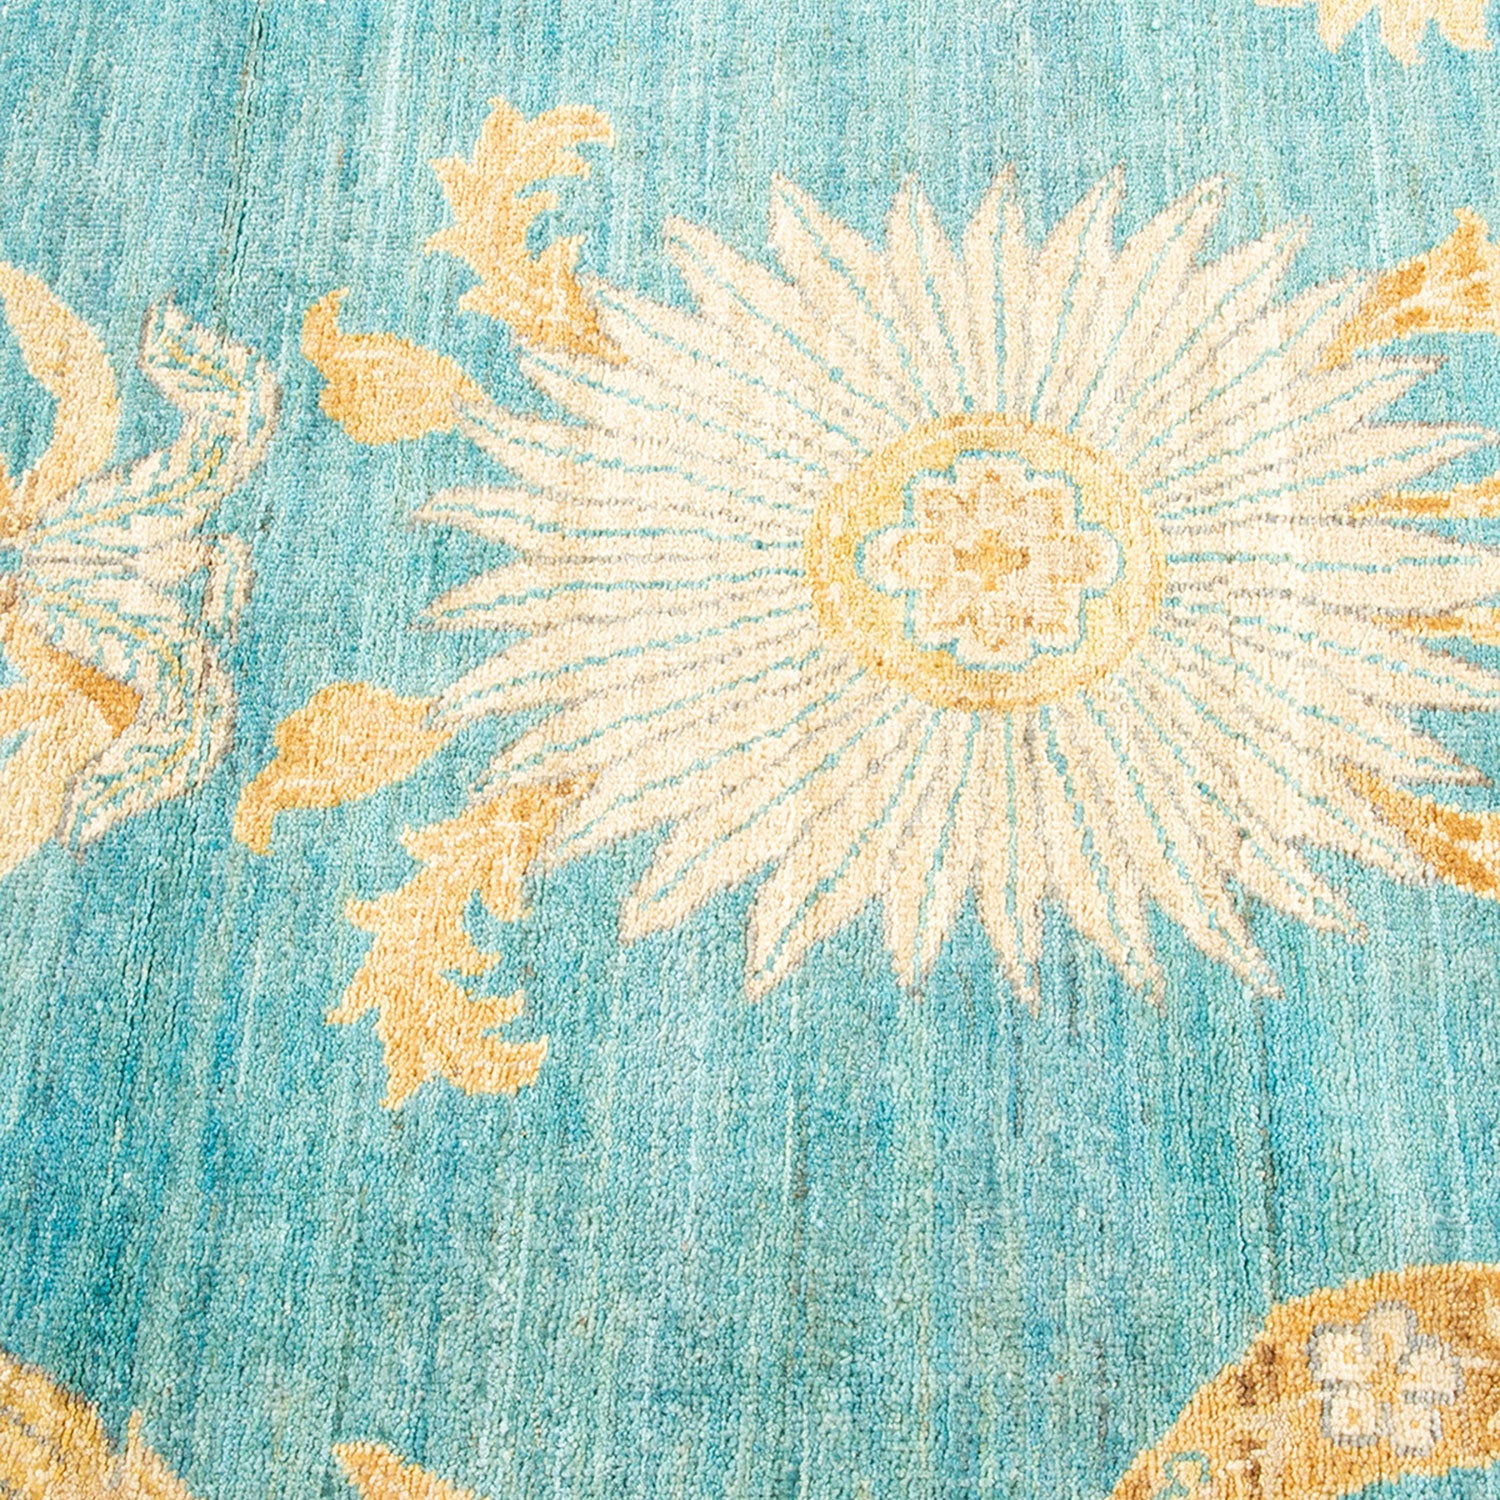 Vibrant turquoise carpet with starburst pattern and ornate floral details.